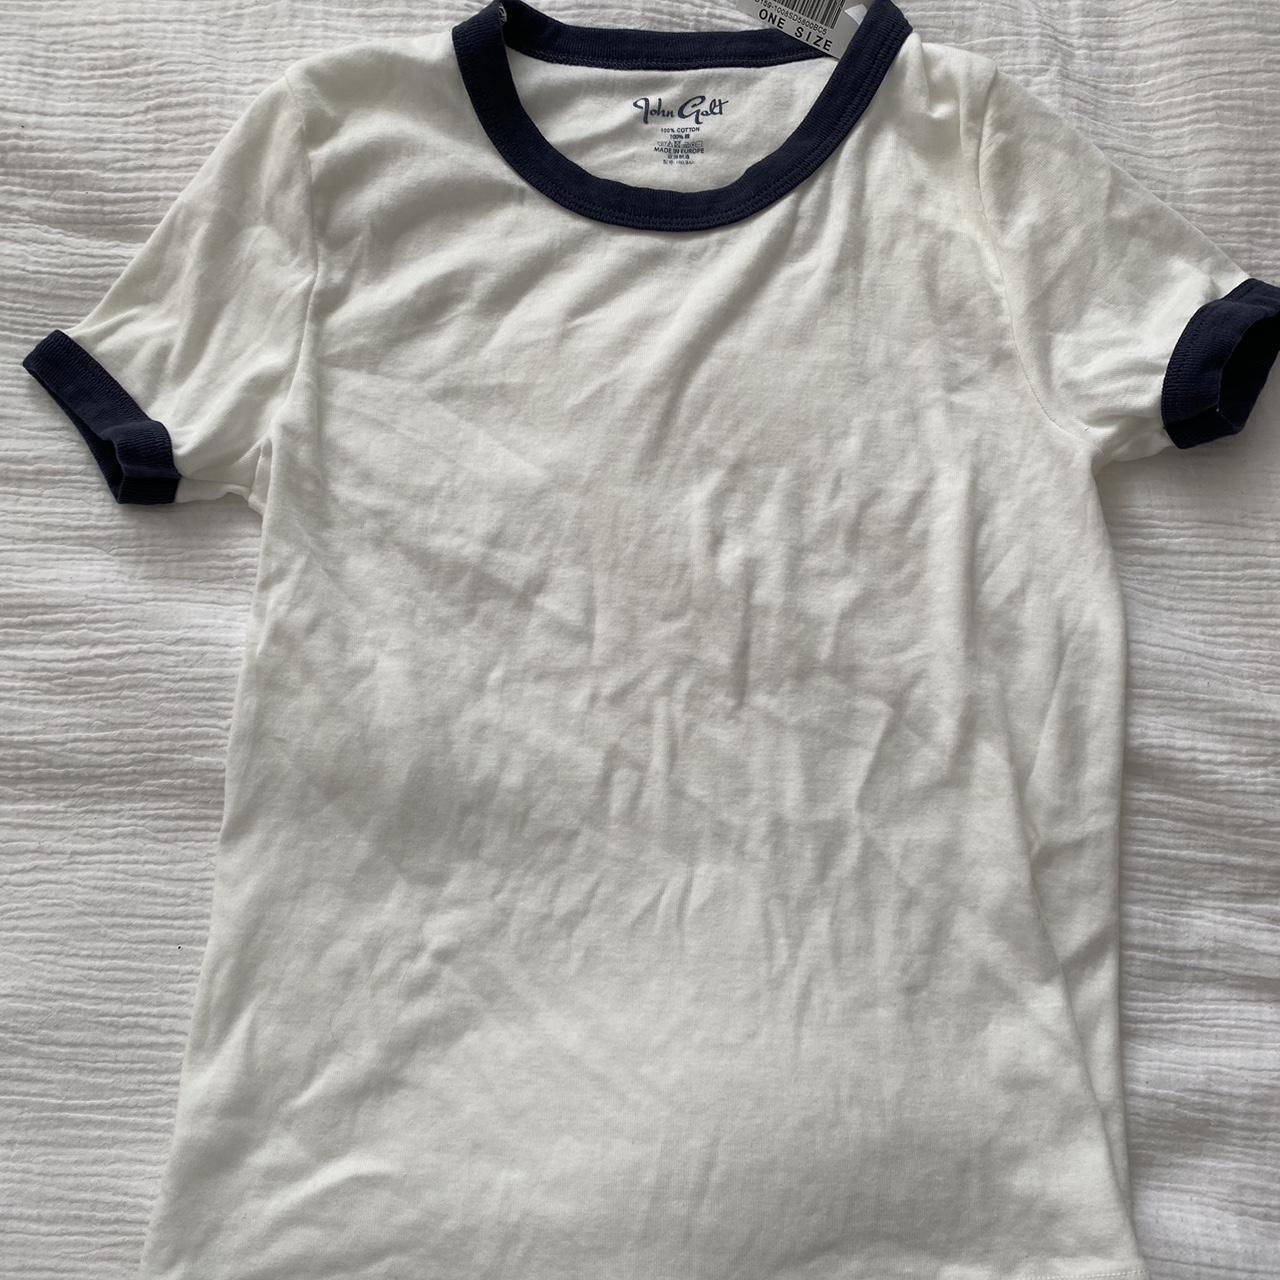 Brandy Melville brand new tee with tags - Depop